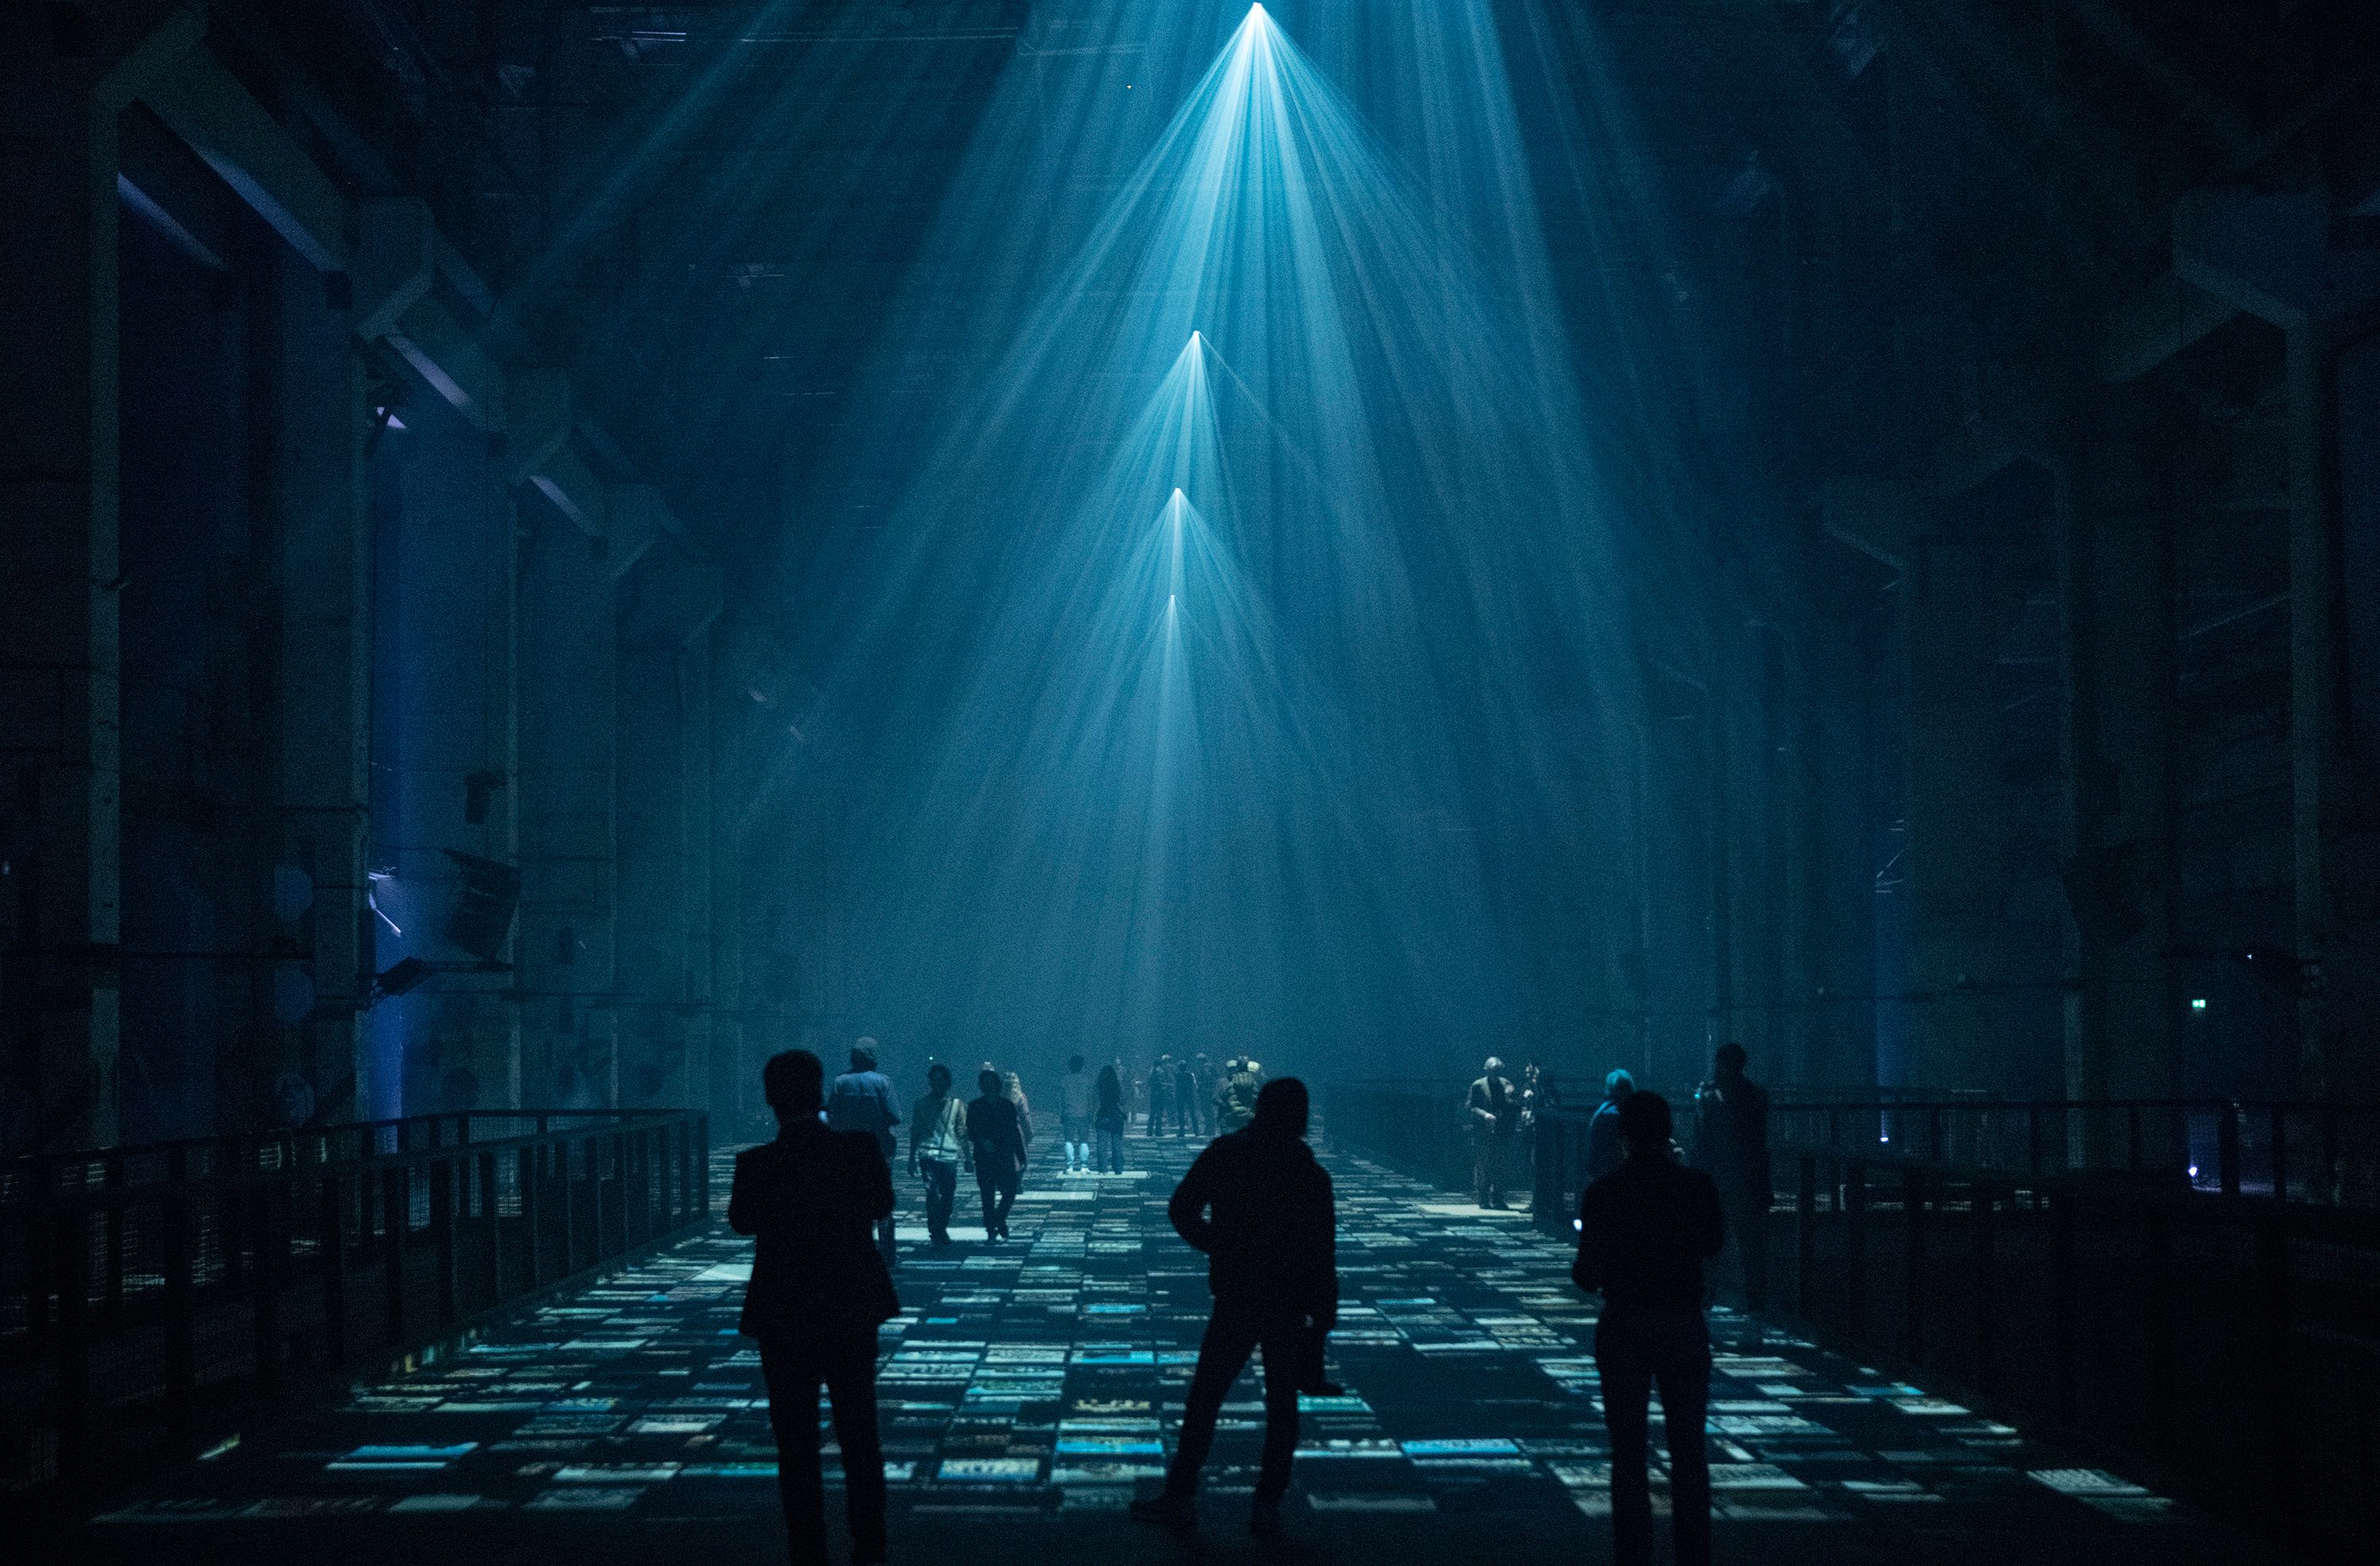 A group of people standing in a large, dimly-lit industrial space with beams of light projecting downwards, creating geometric patterns on the floor.